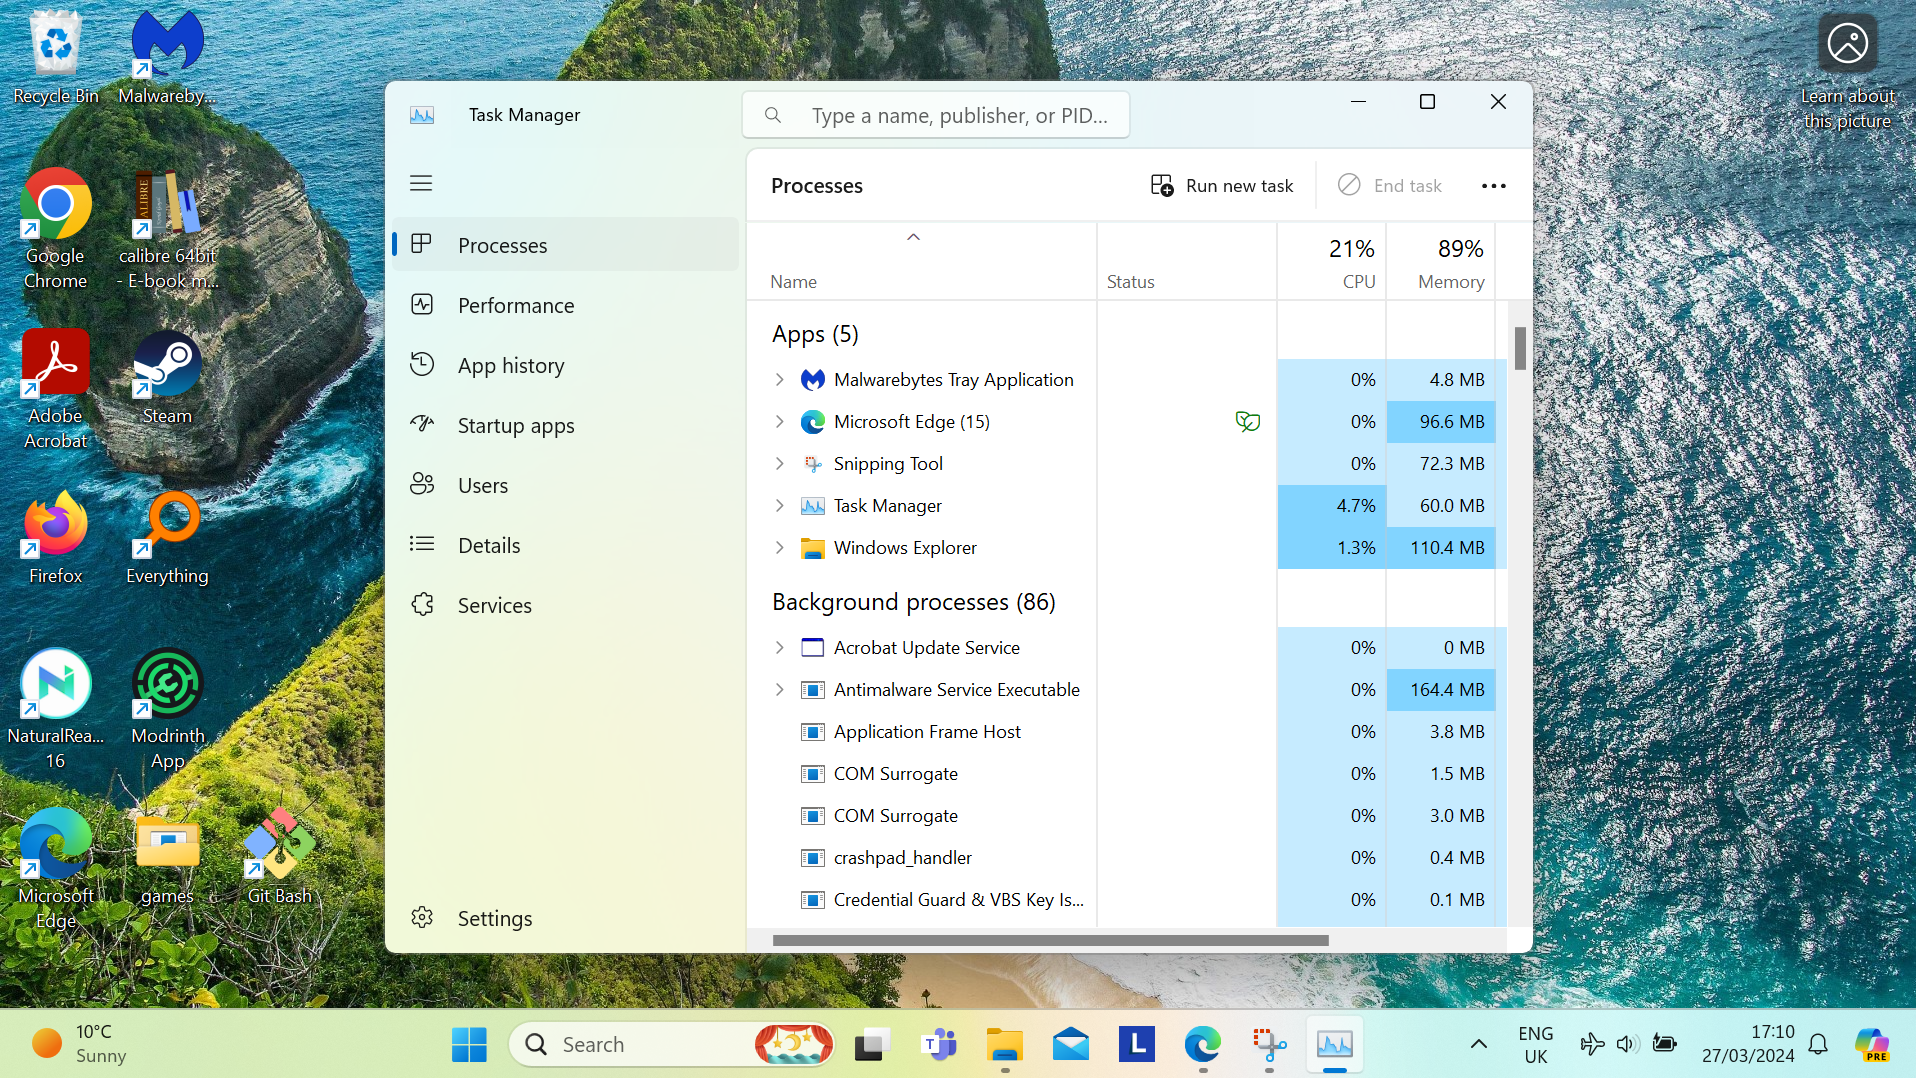 A screenshot featuring the newer Task Manager design